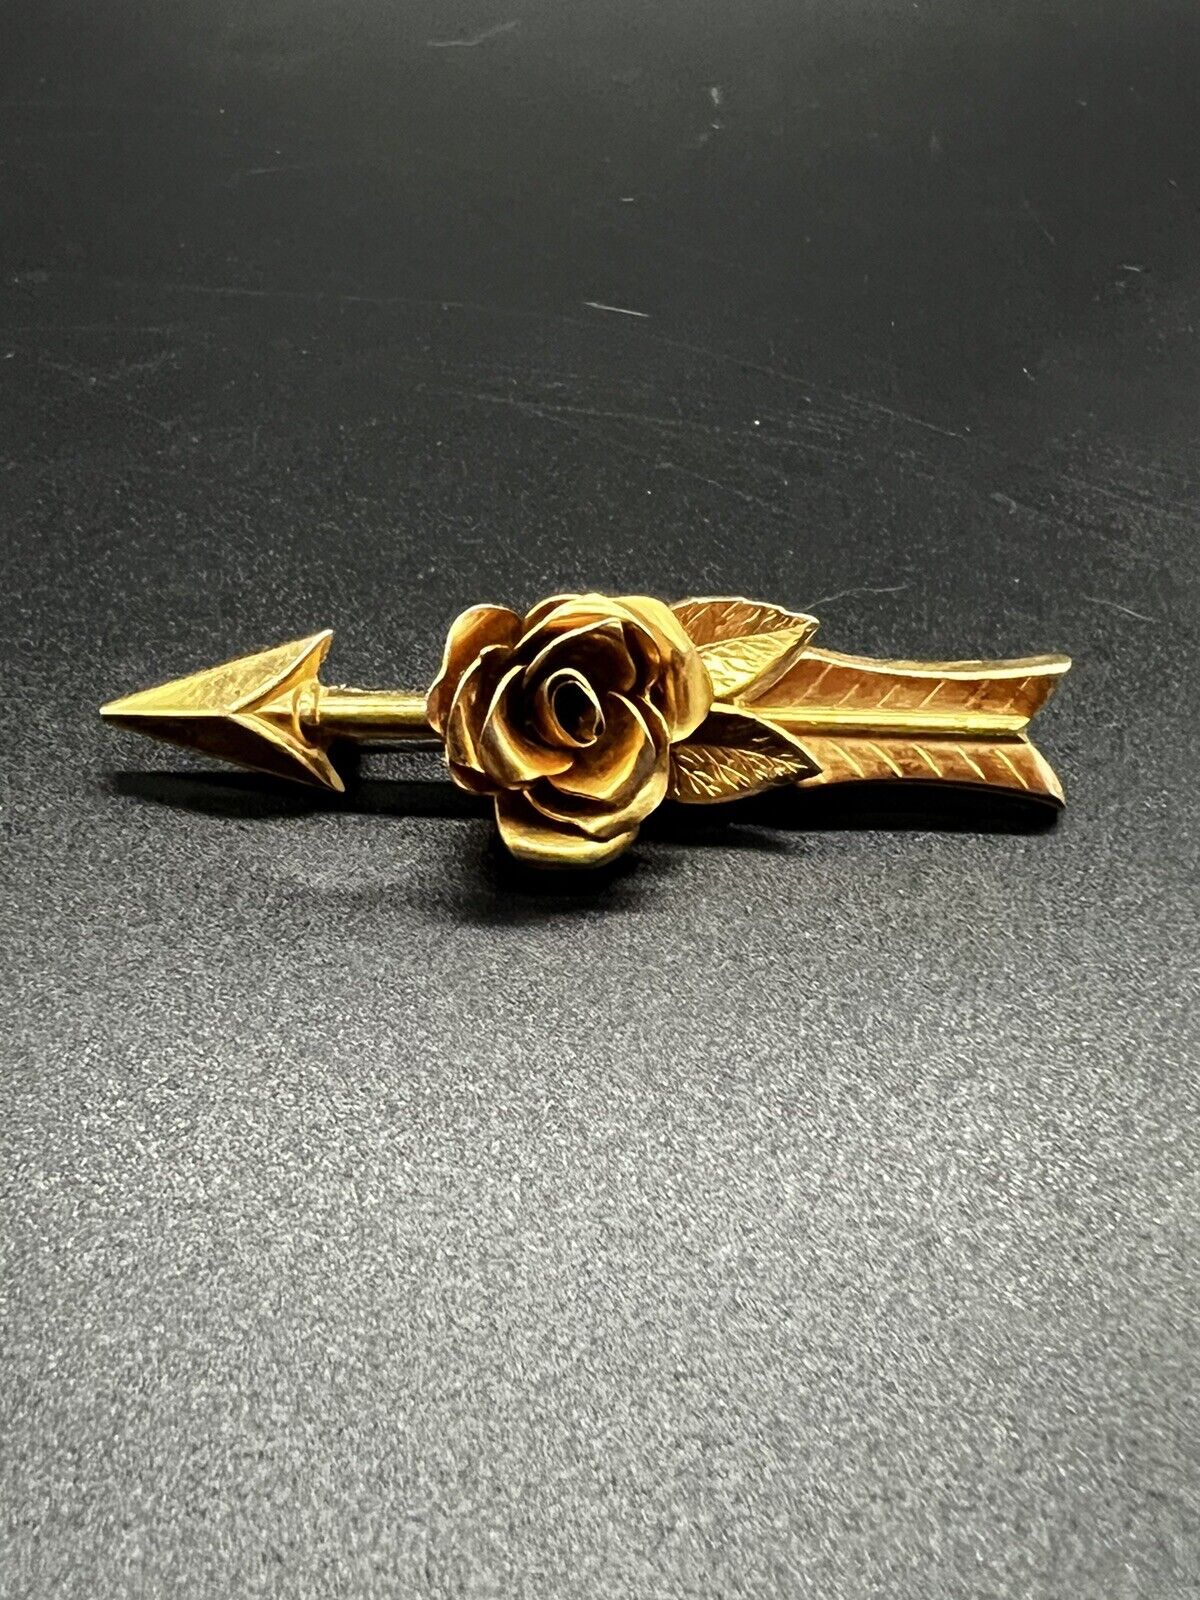 Vintage 1948 Signed Coro Brooch Rose and Arrow Pat #150423 